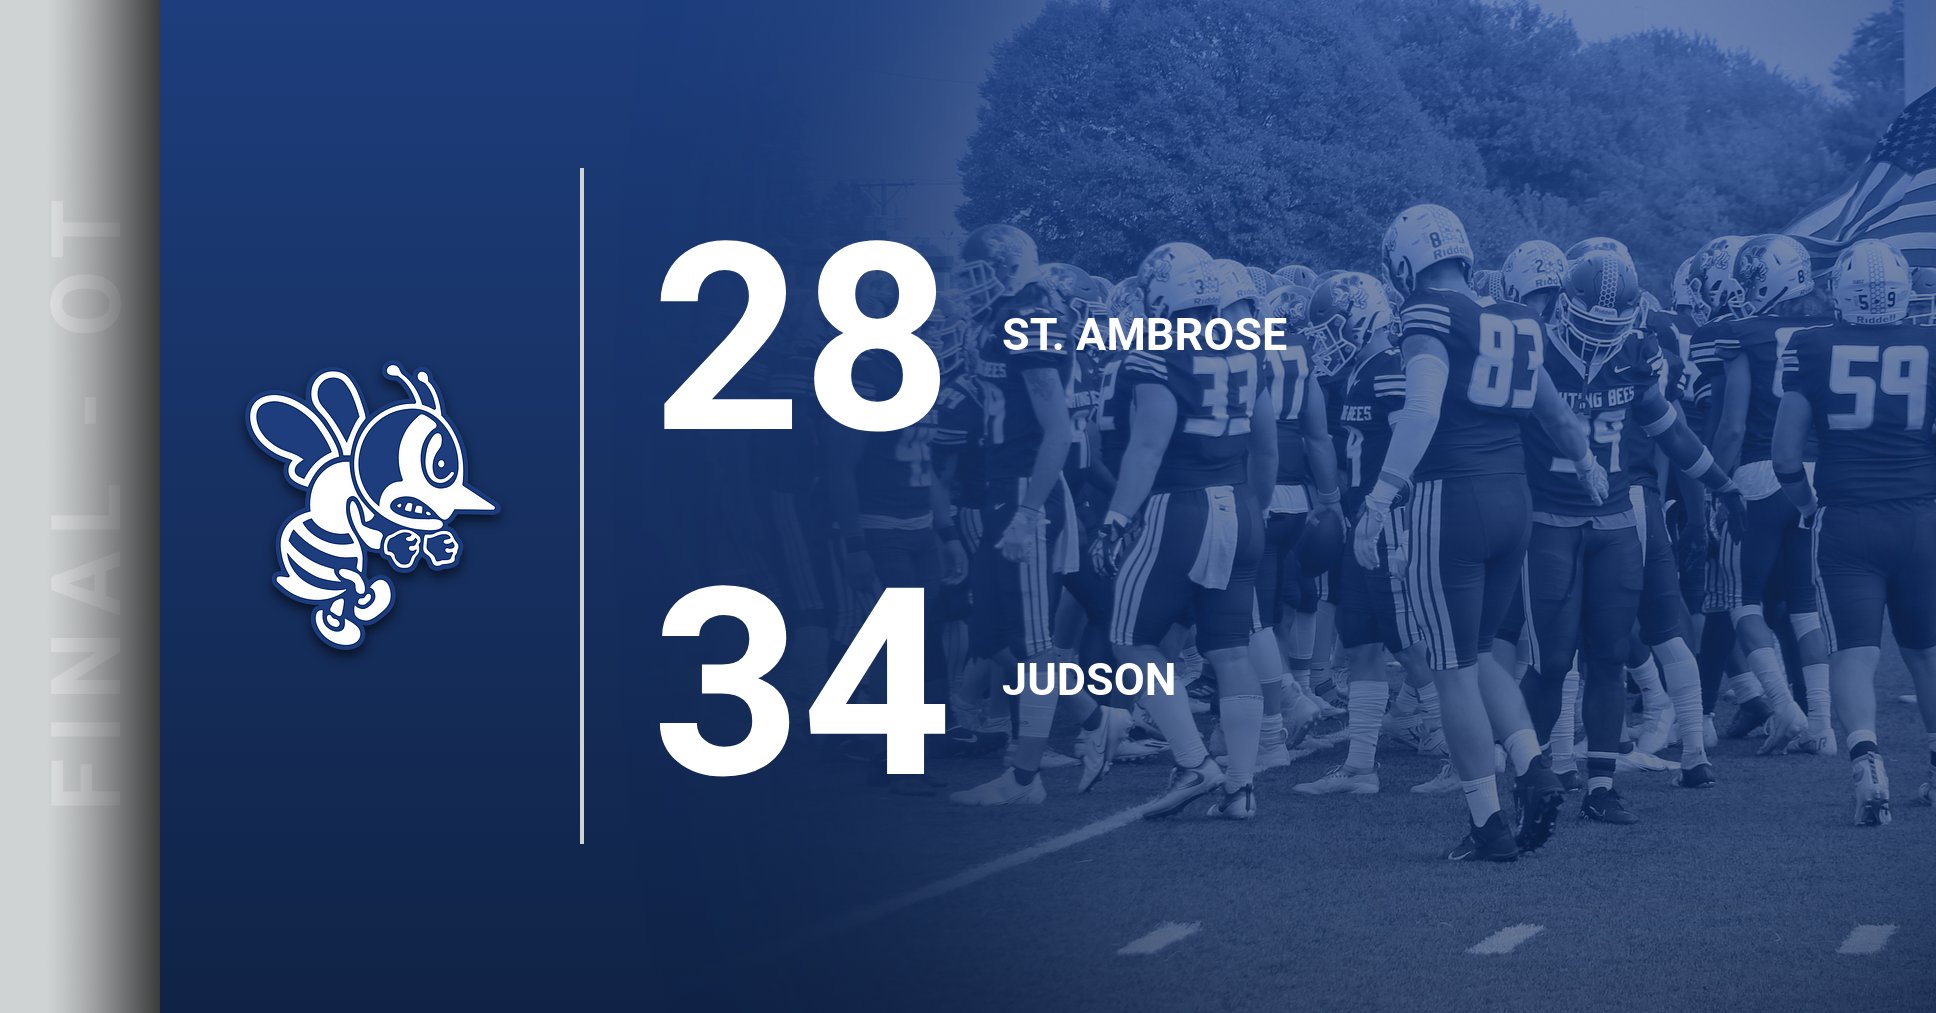 St. Ambrose falls in overtime at Judson